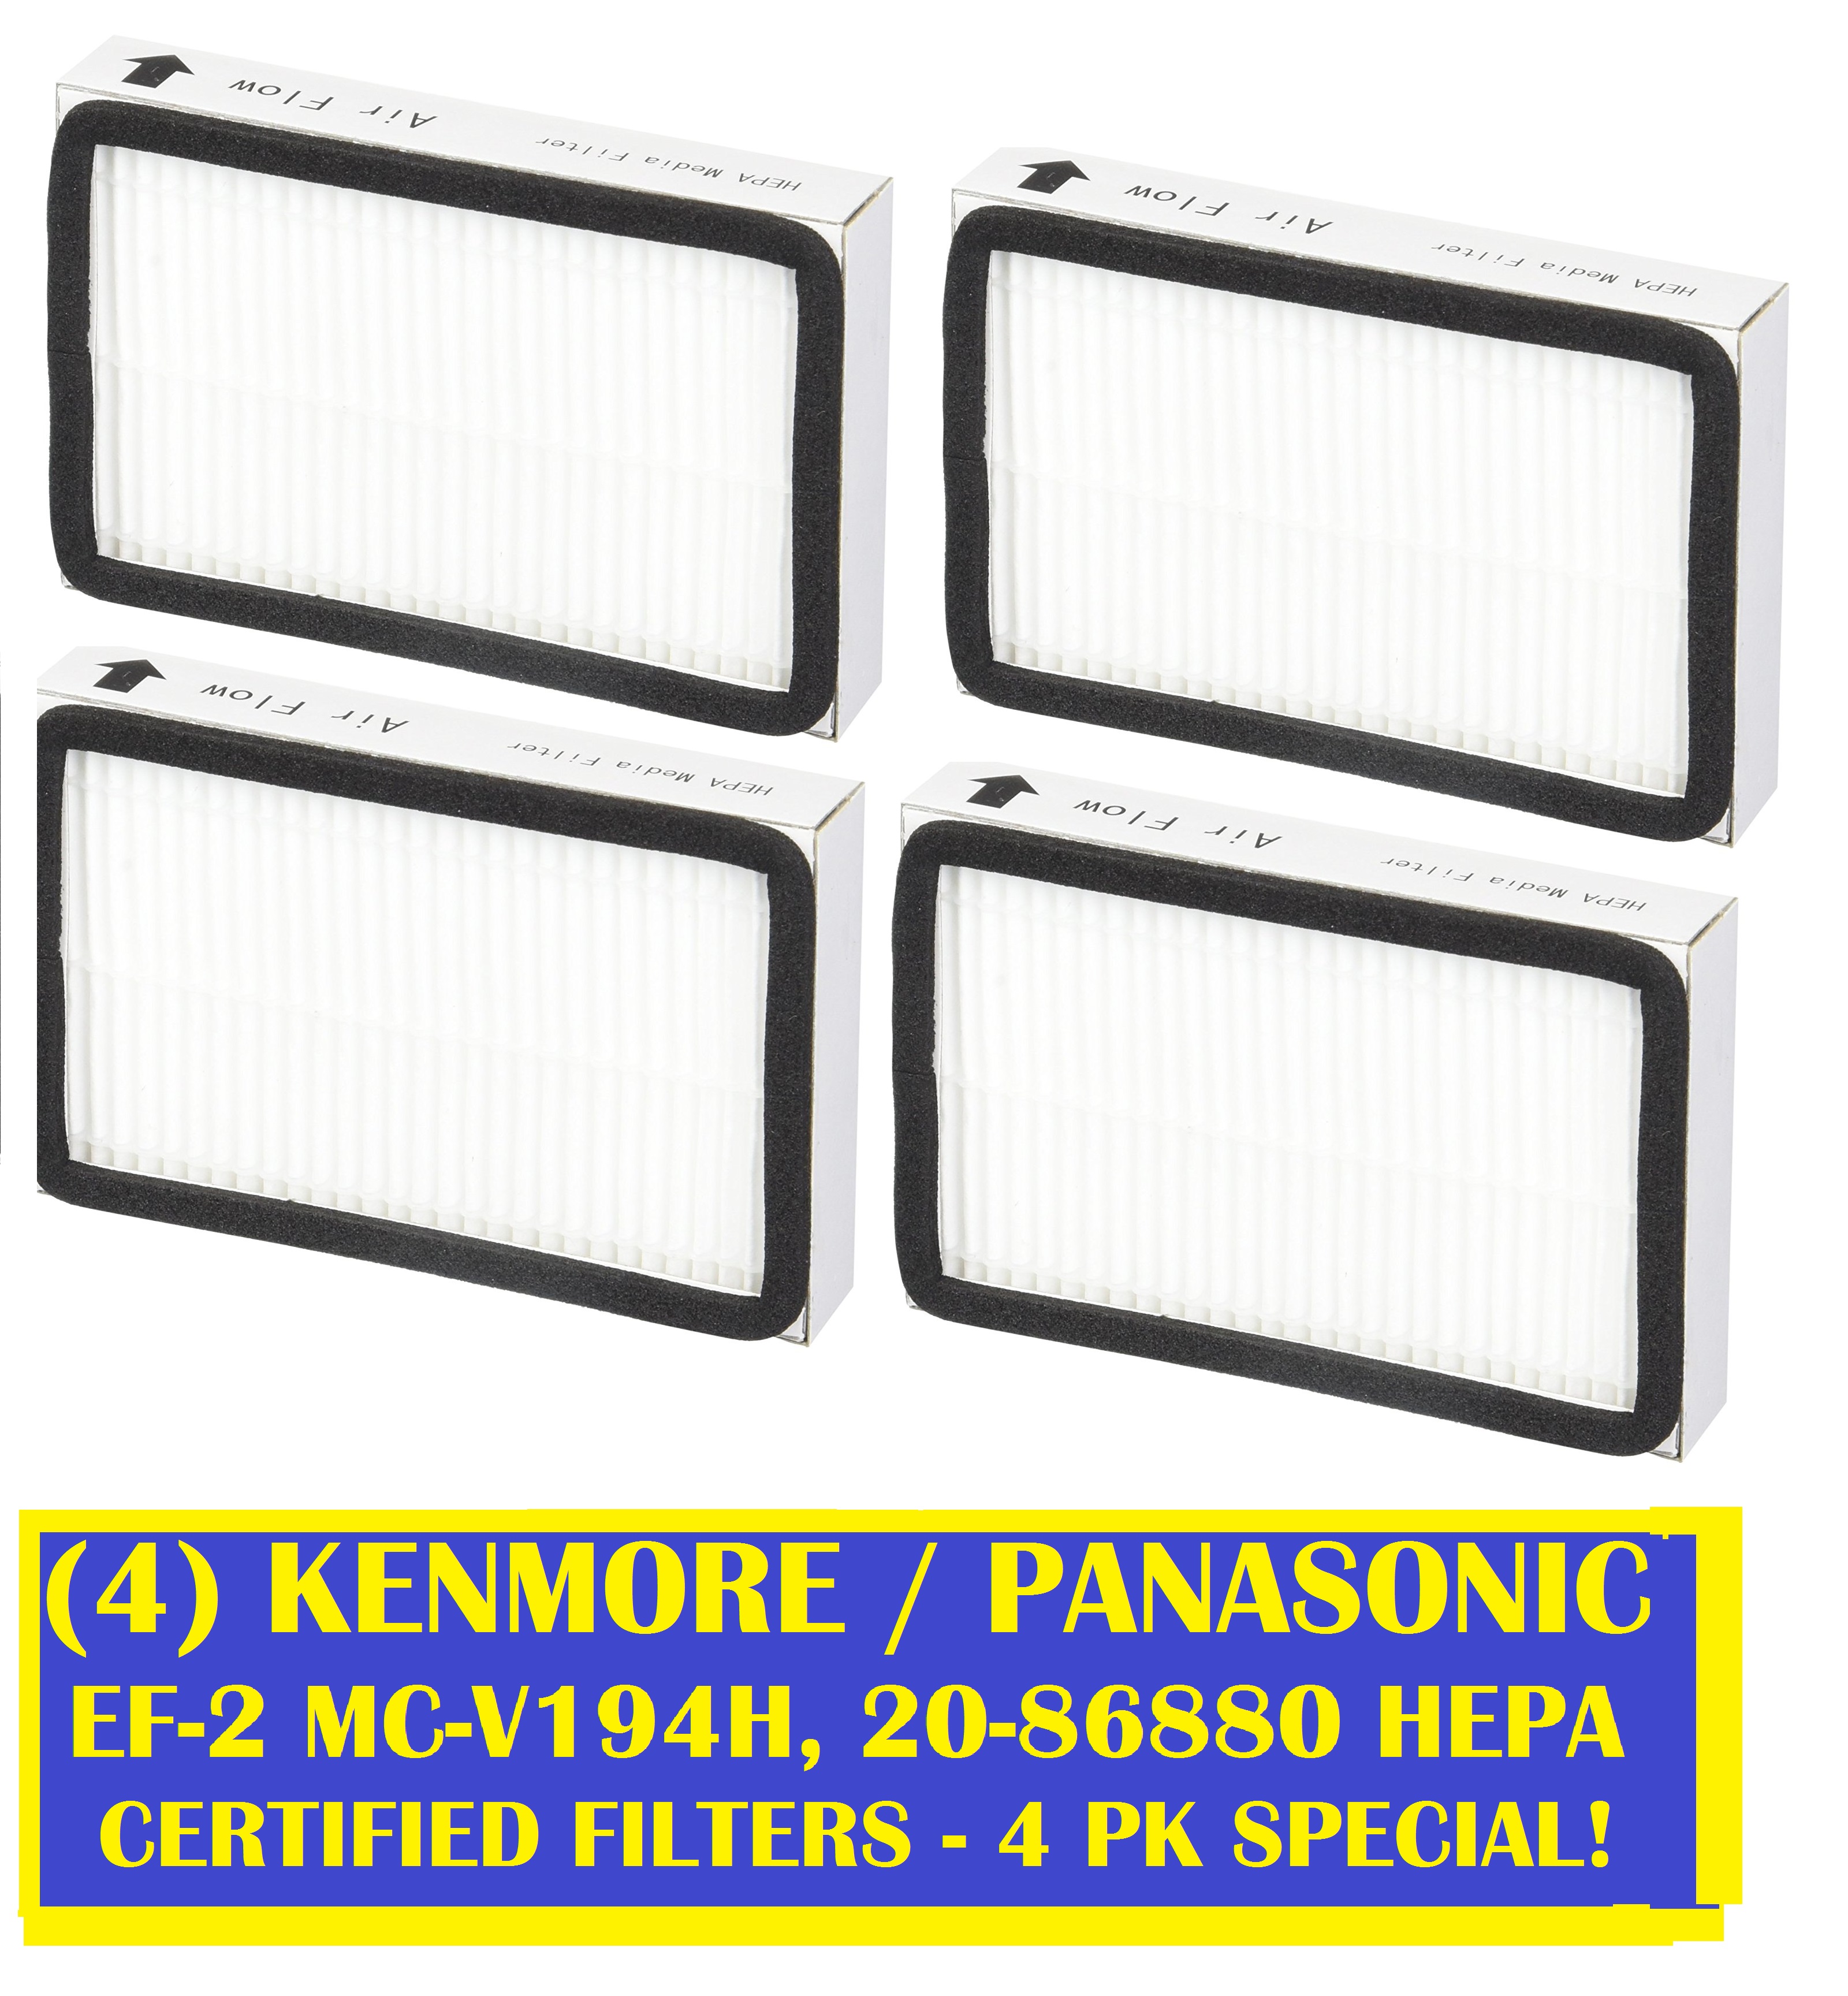 HQRP (4 Pack) For Panasonic EF2 HEPA Certified Exhaust Filter, Traps 99.97% of Allergens. Fits 50-86880, 86880 4 Filters